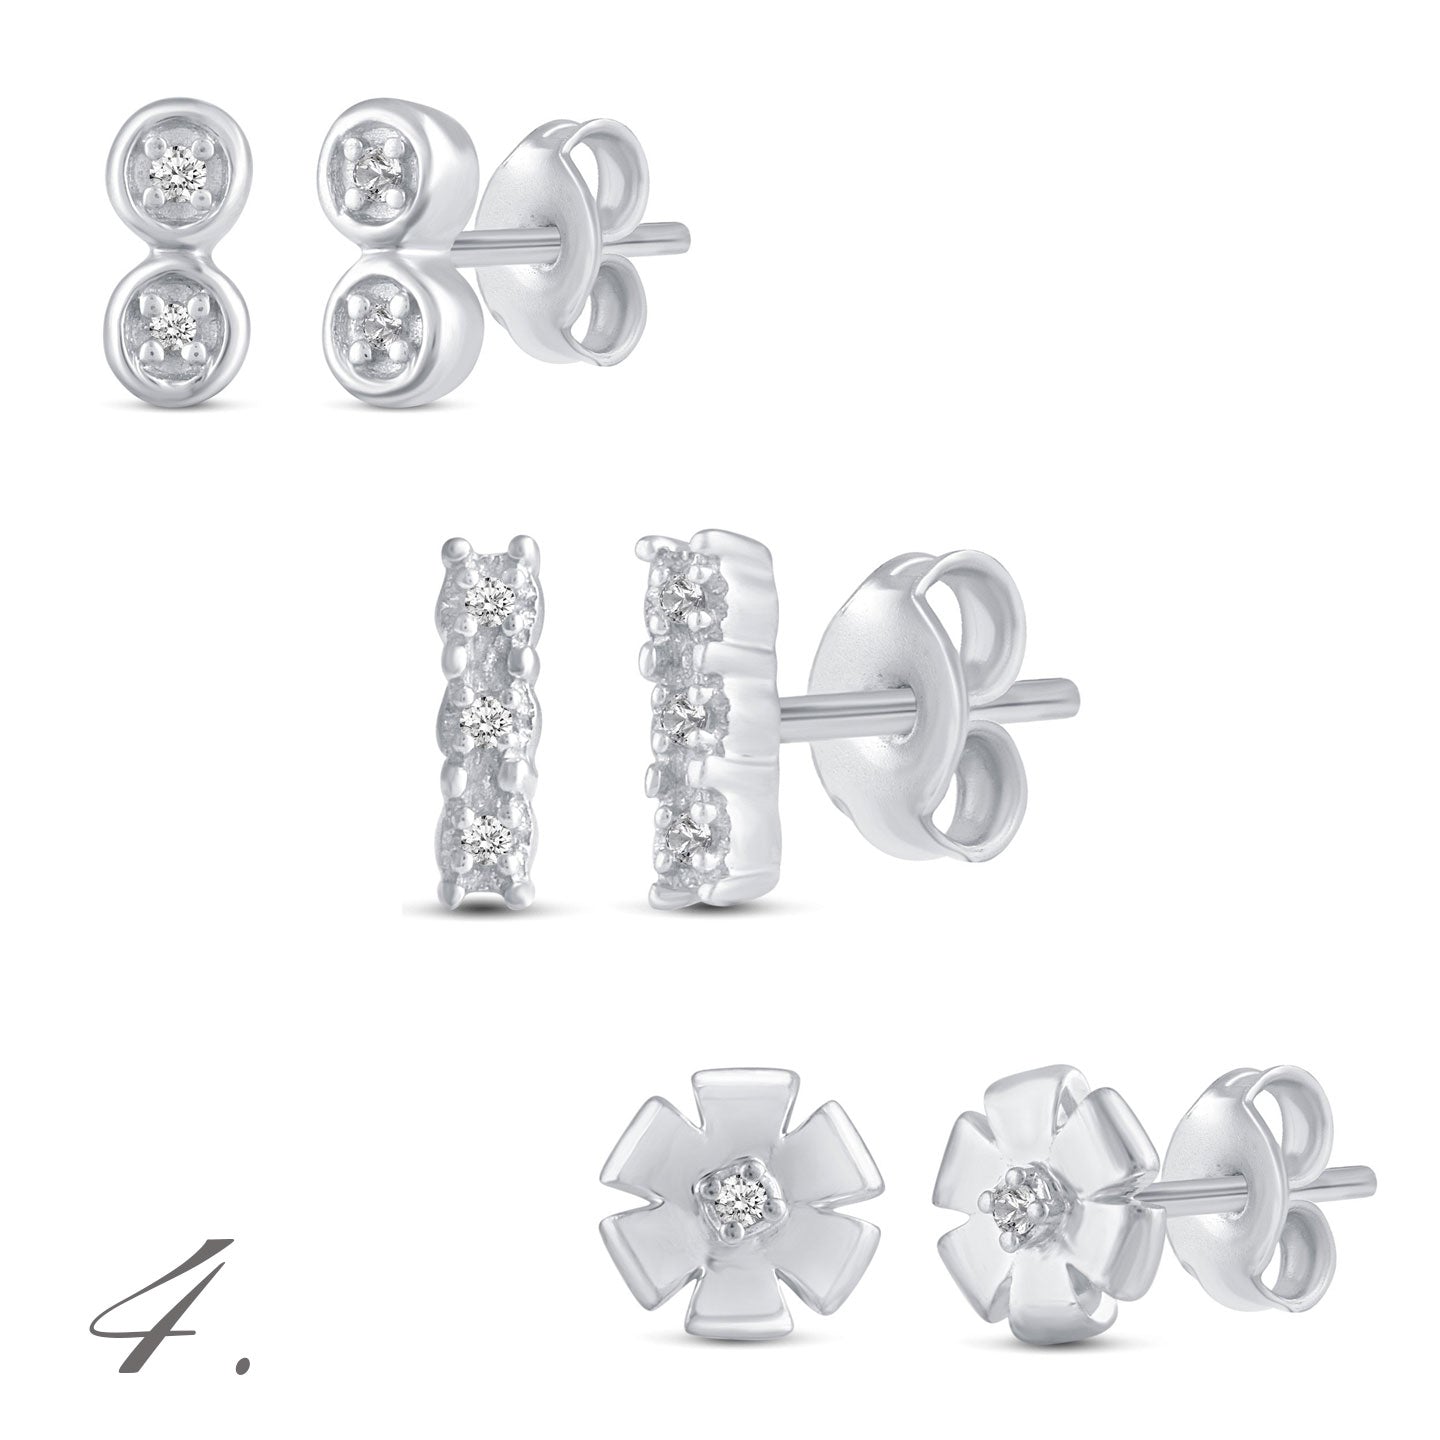 3 Pairs Set Ear Party 1/10 -1/20 Cttw Natural Diamond Earrings in 925 Sterling Silver flower bar